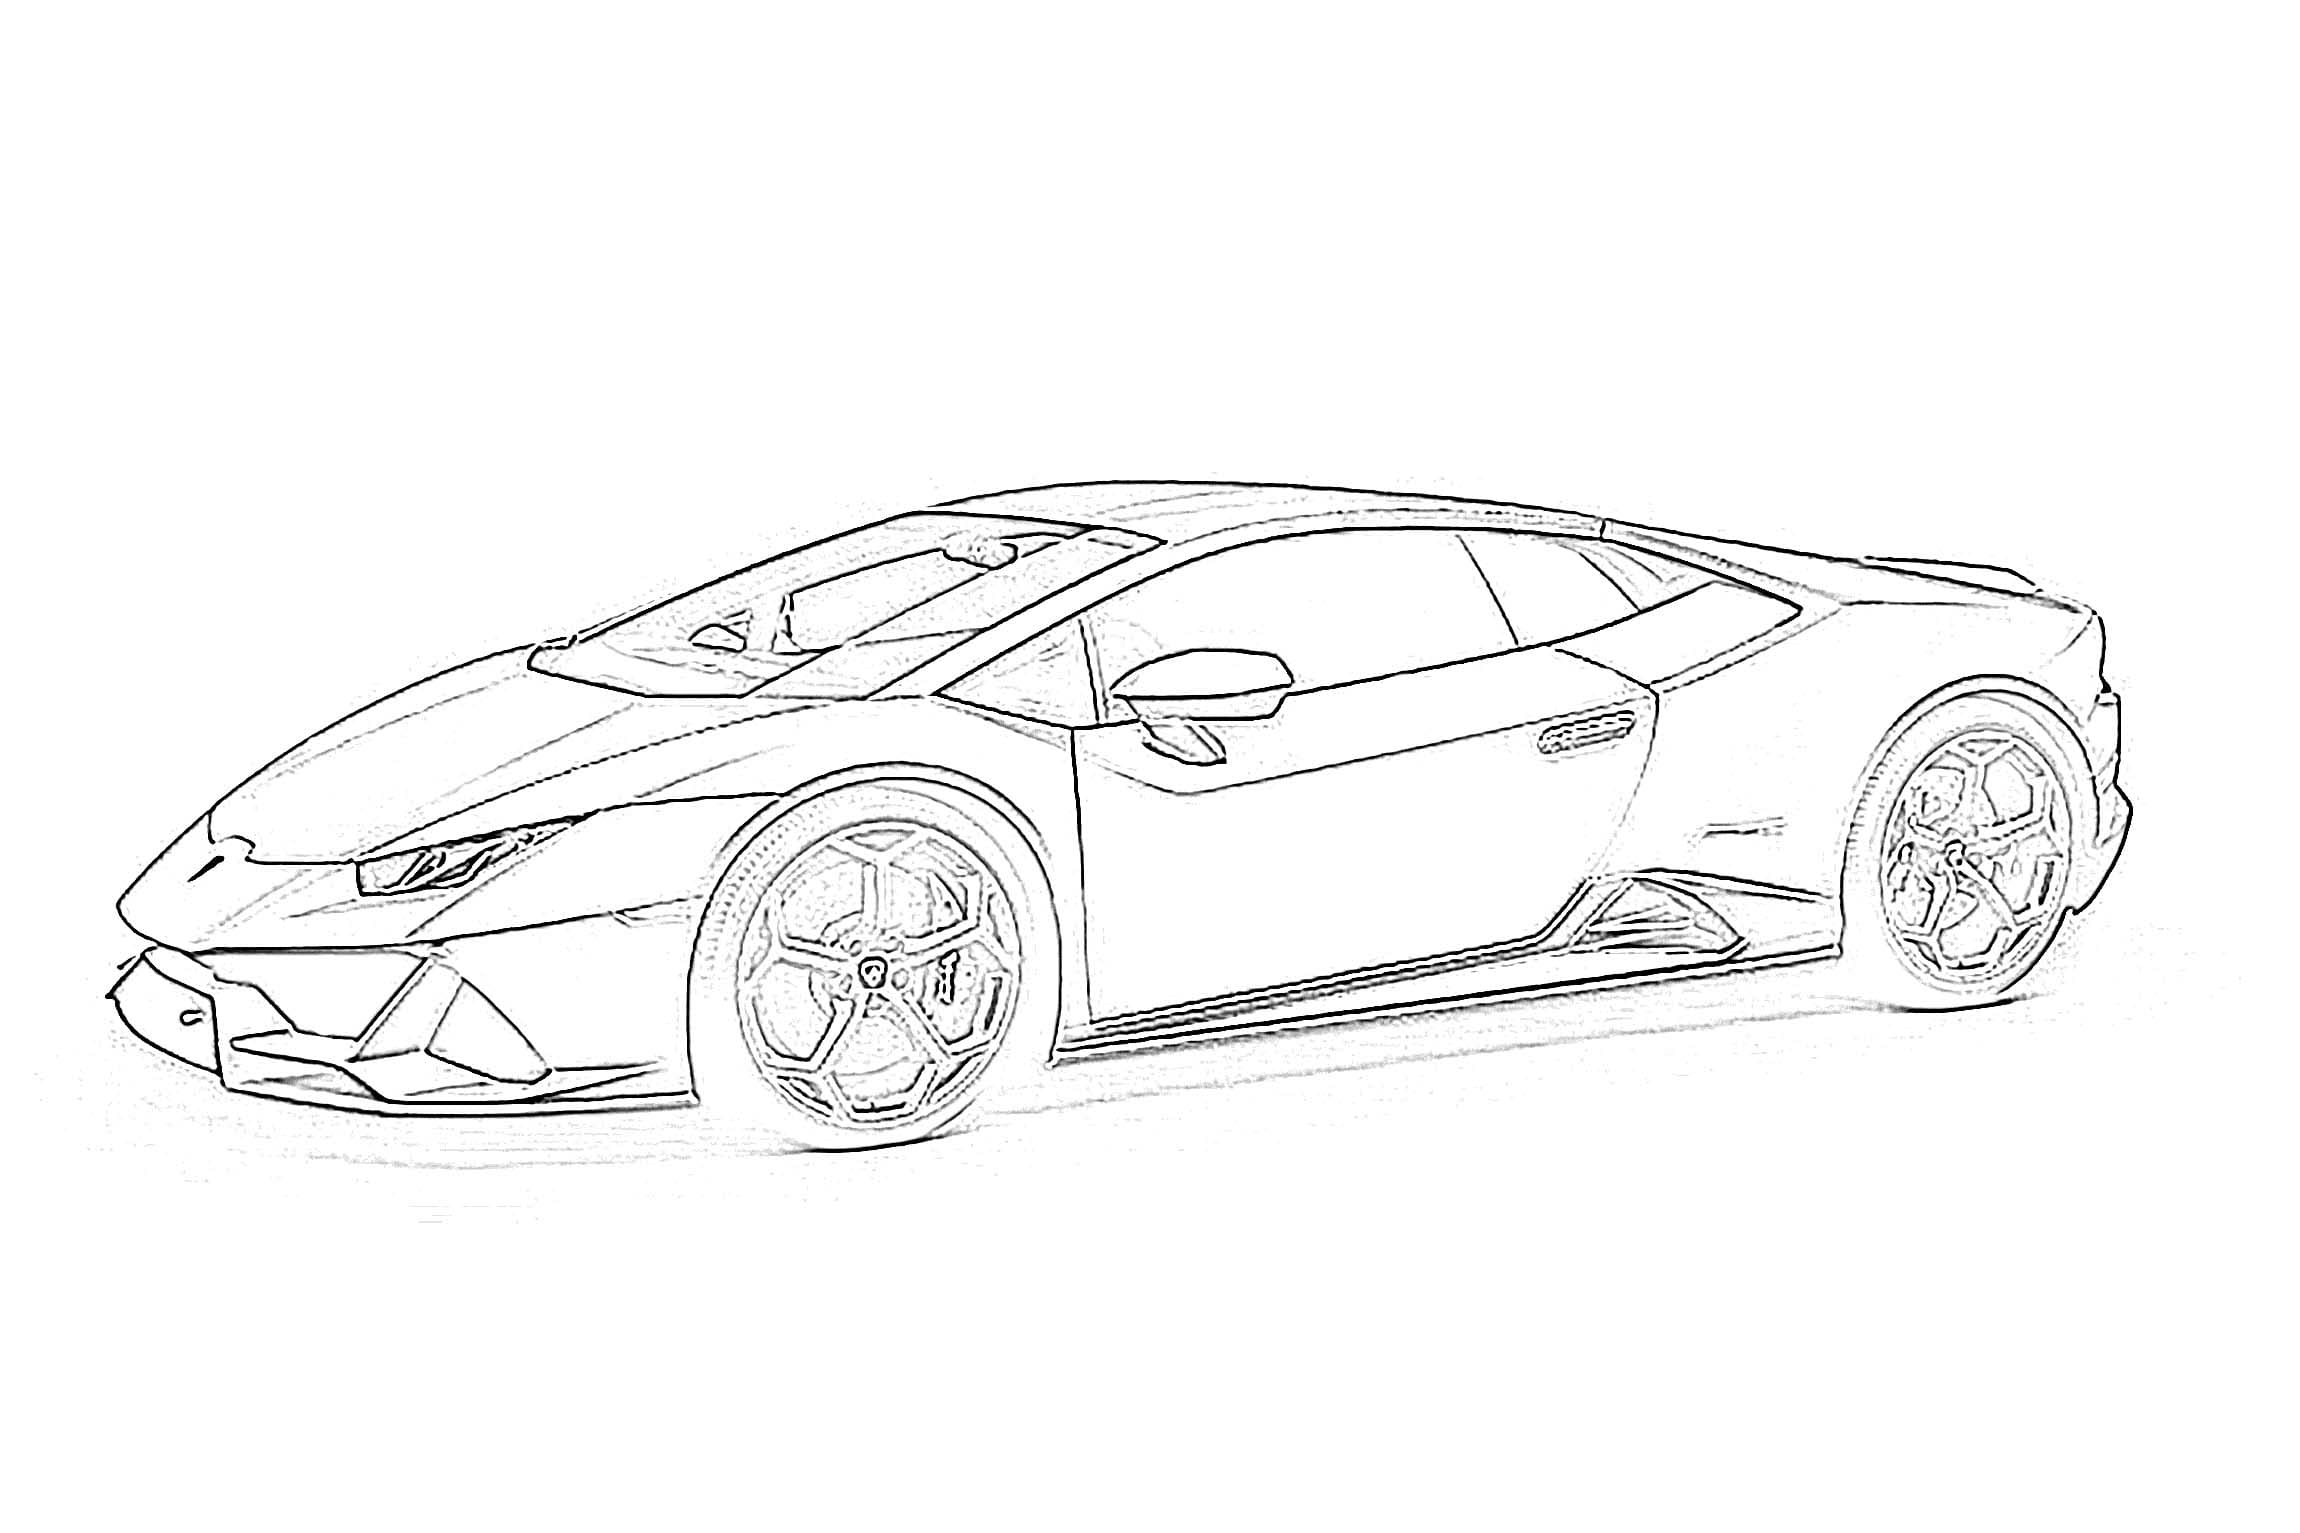 Sports Car Image Outline coloring page - Download, Print or Color ...